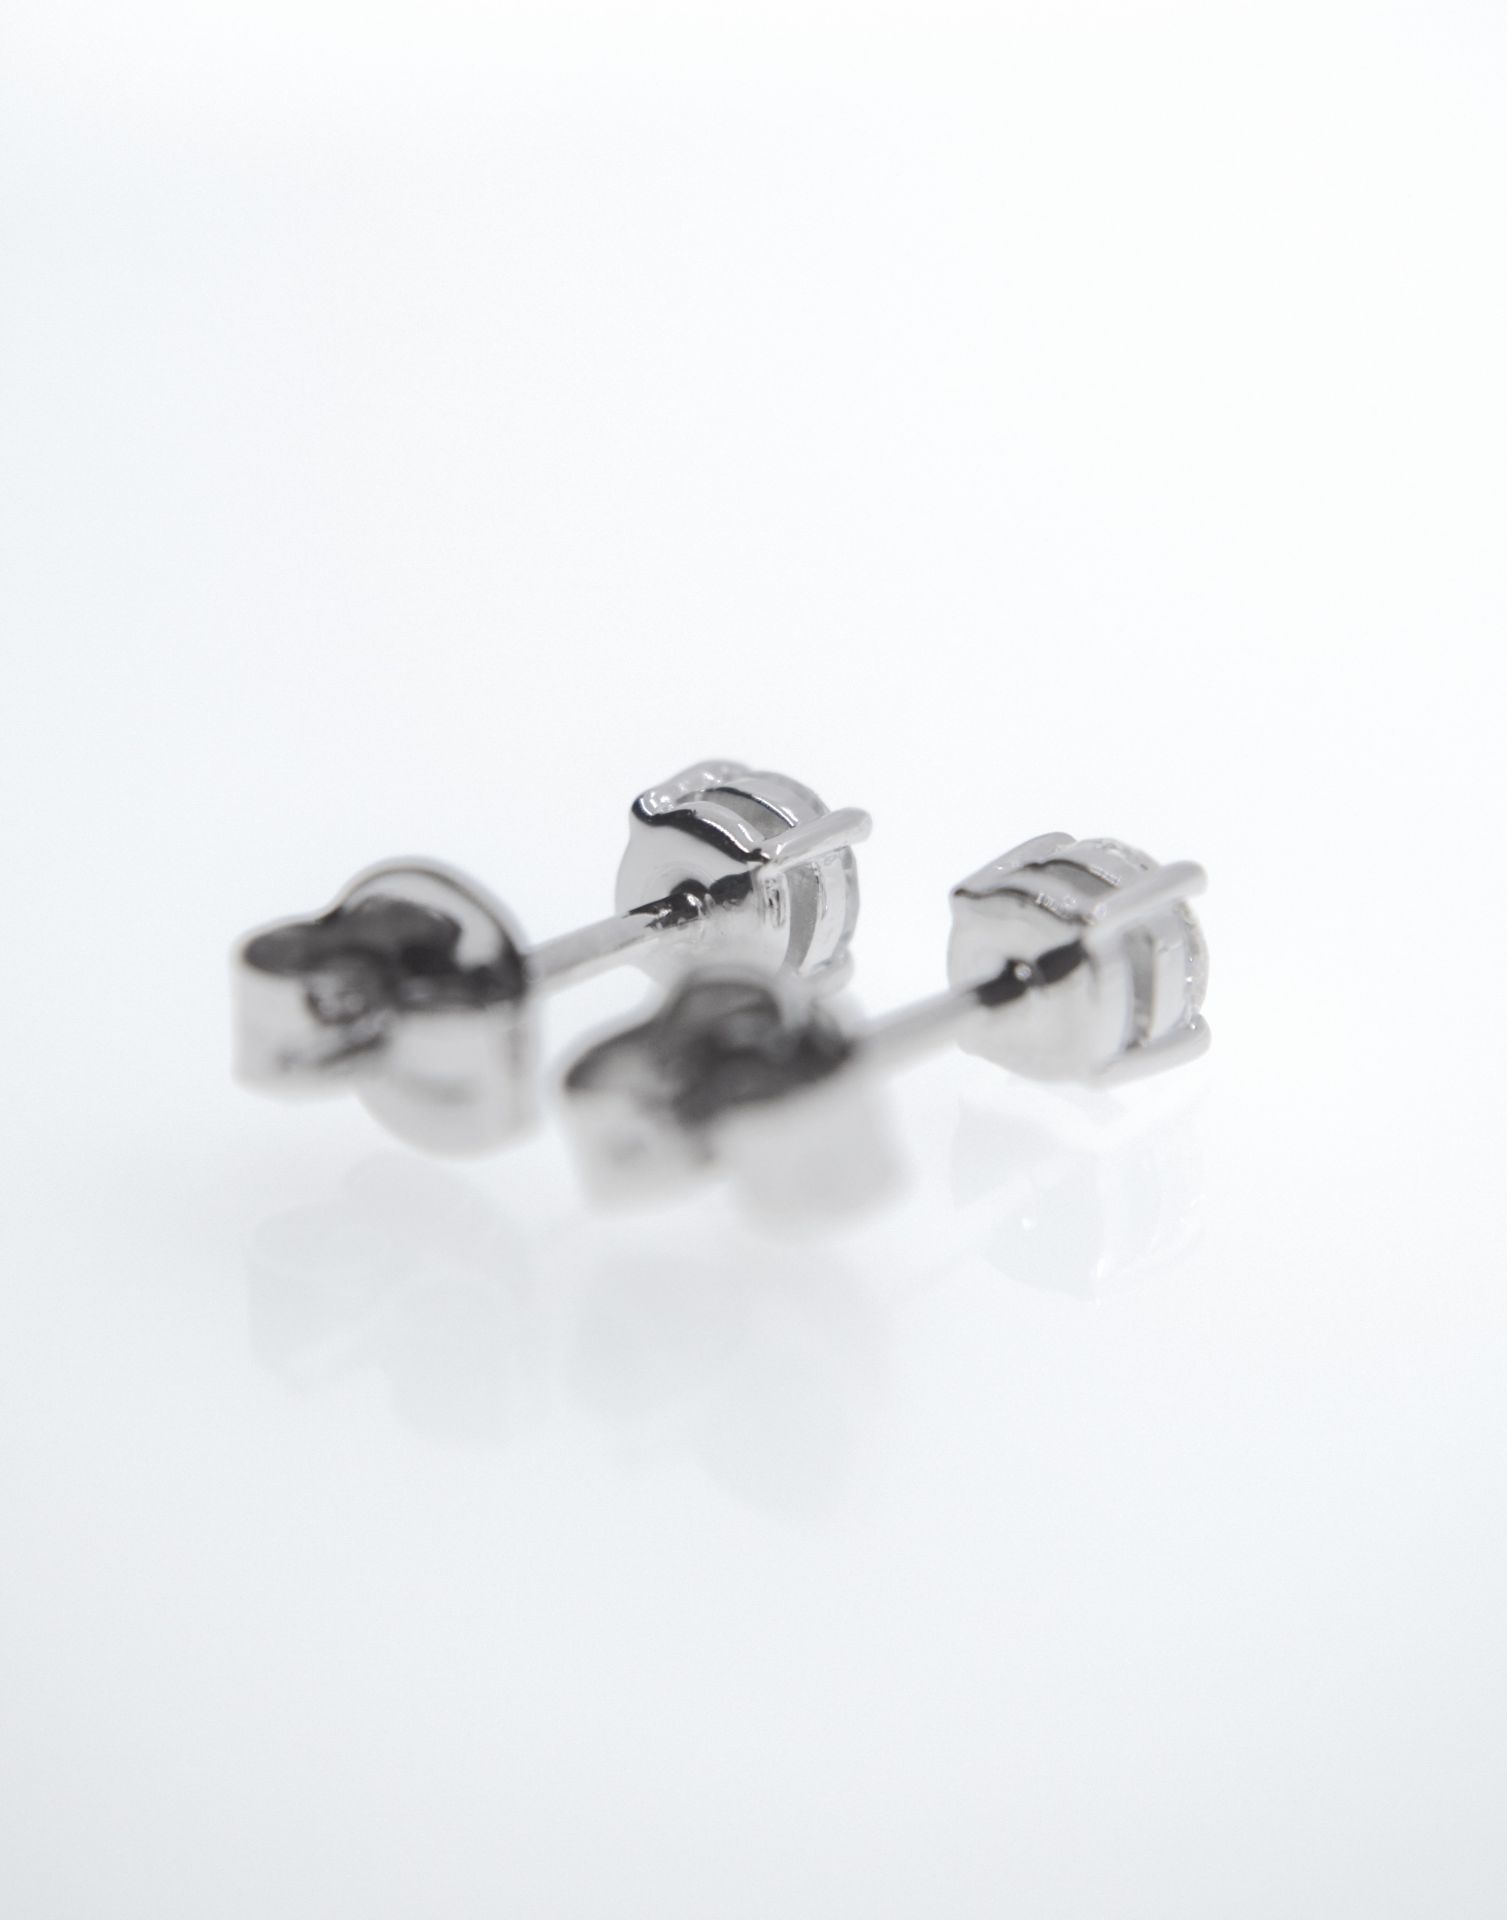 0.50CT DIAMOND SOLITAIRE EAR STUDS WITH HALLMARKED BACKS IN SOLID WHITE GOLD - Image 4 of 5